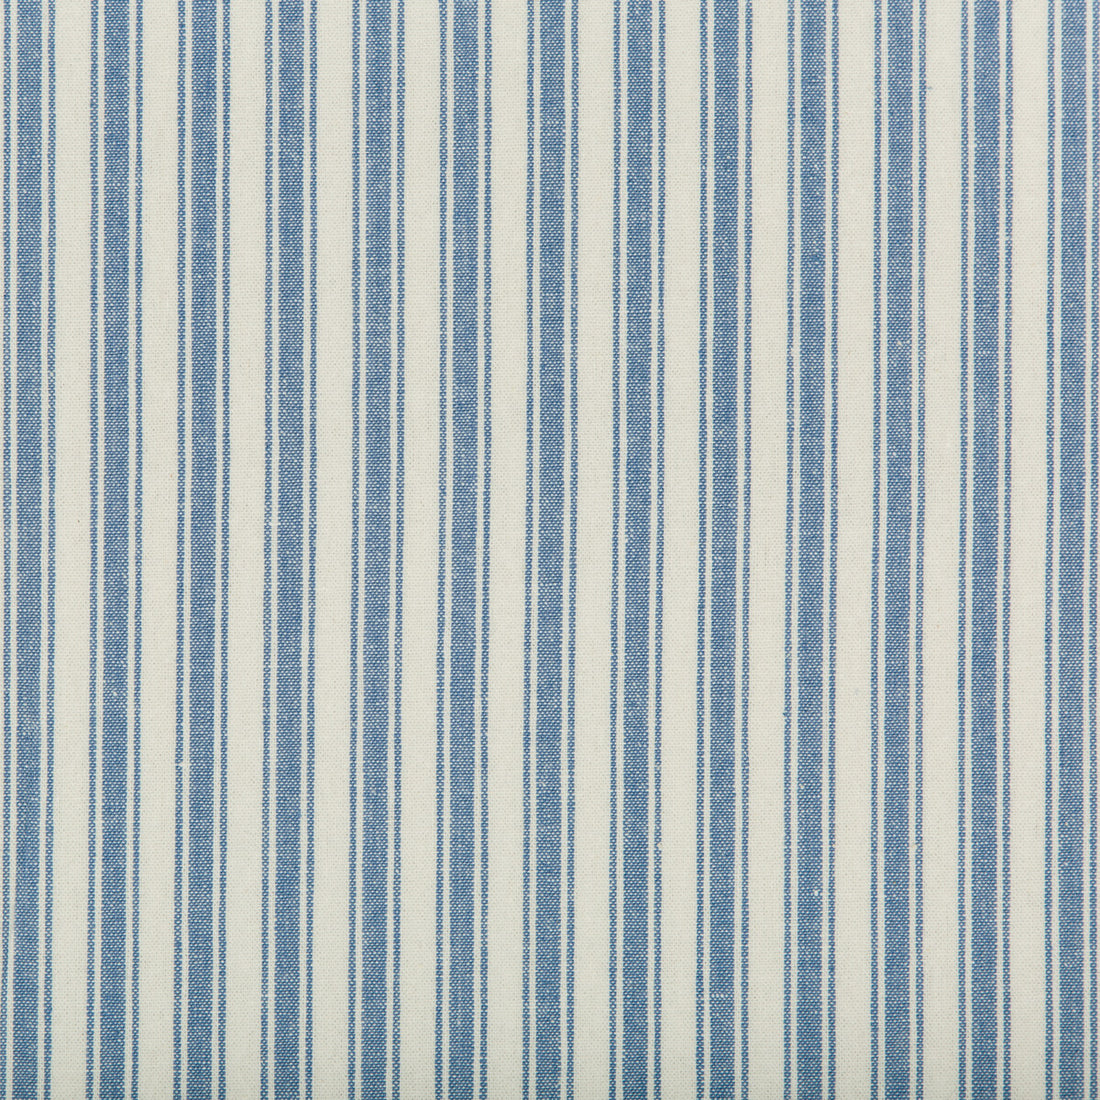 Seastripe fabric in chambray color - pattern 35542.15.0 - by Kravet Basics in the Bermuda collection